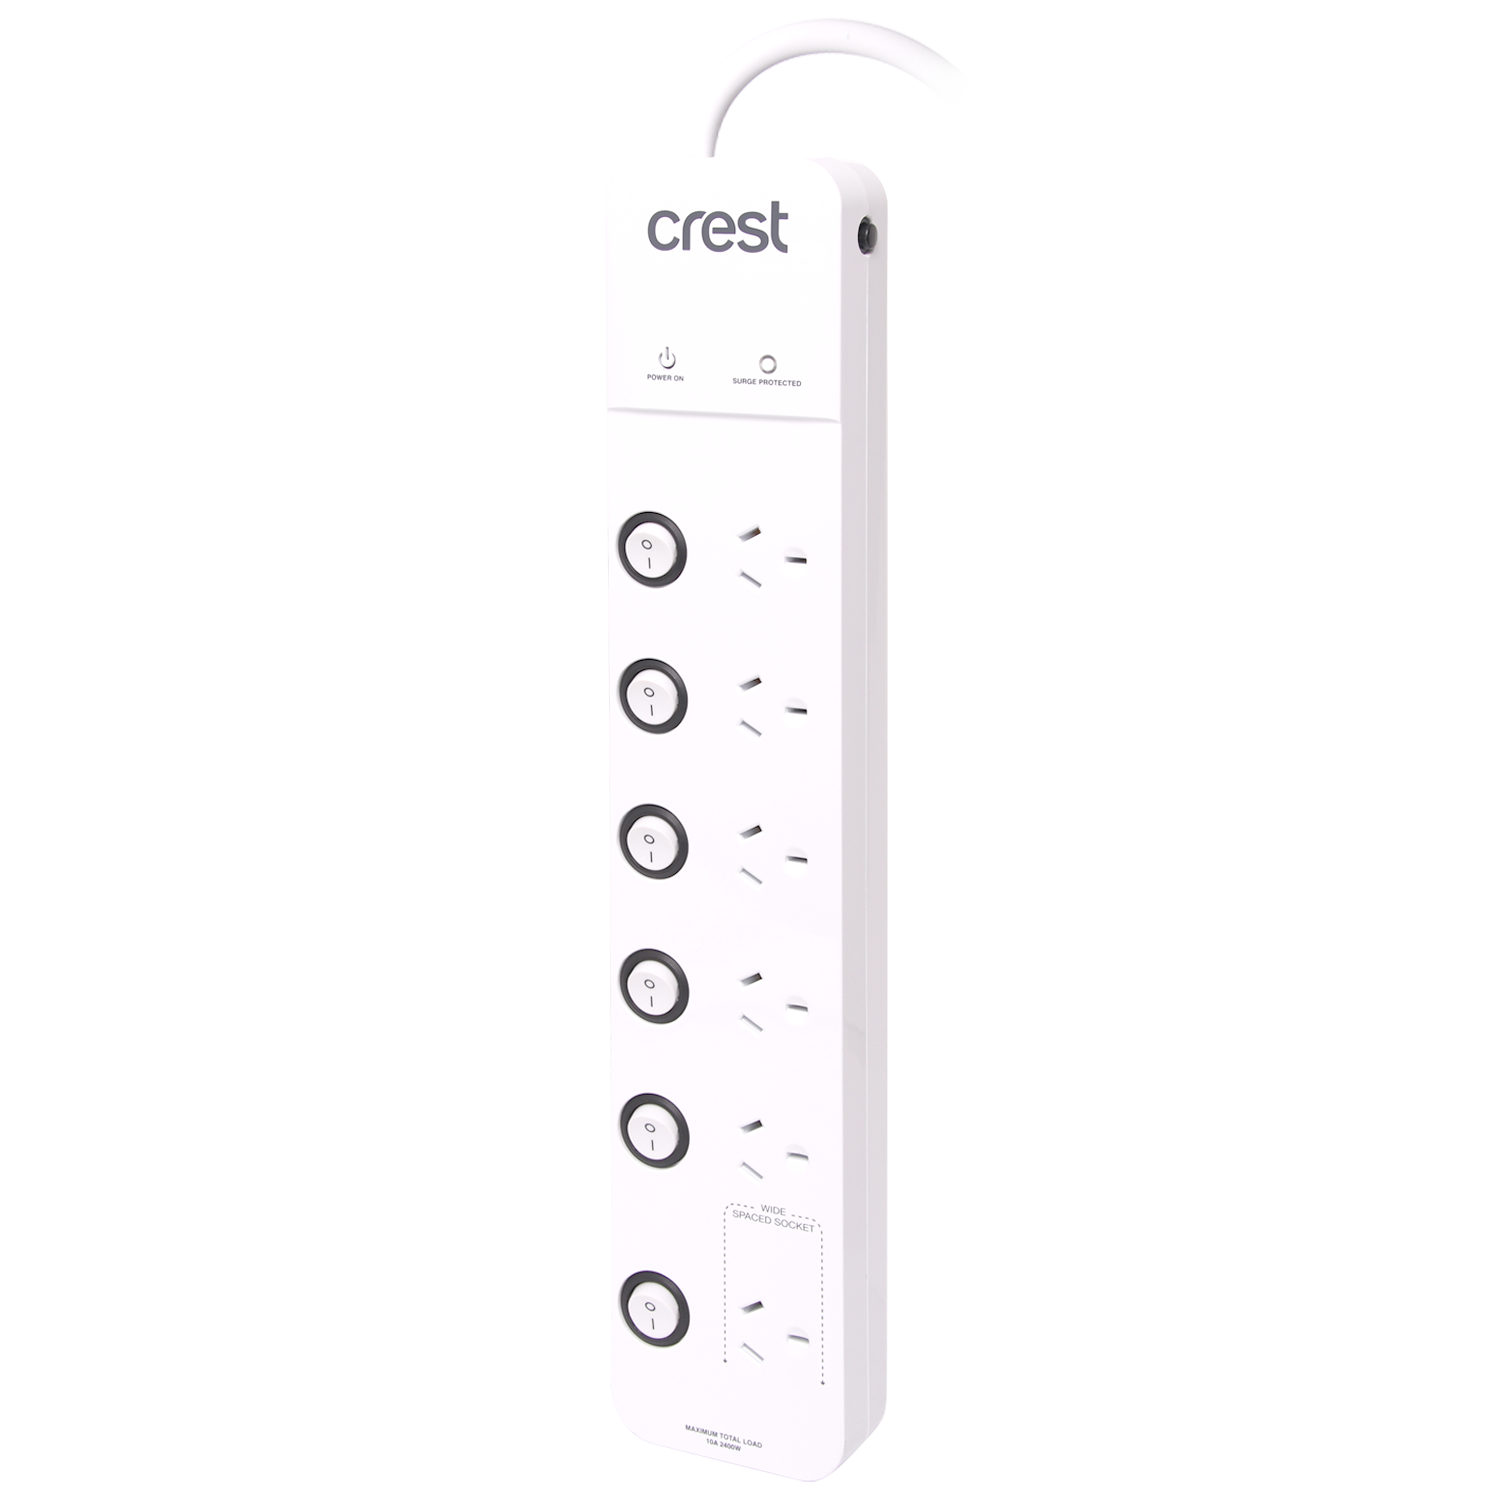 Power Board 6 Sockets with 6 Switches & Surge Protection